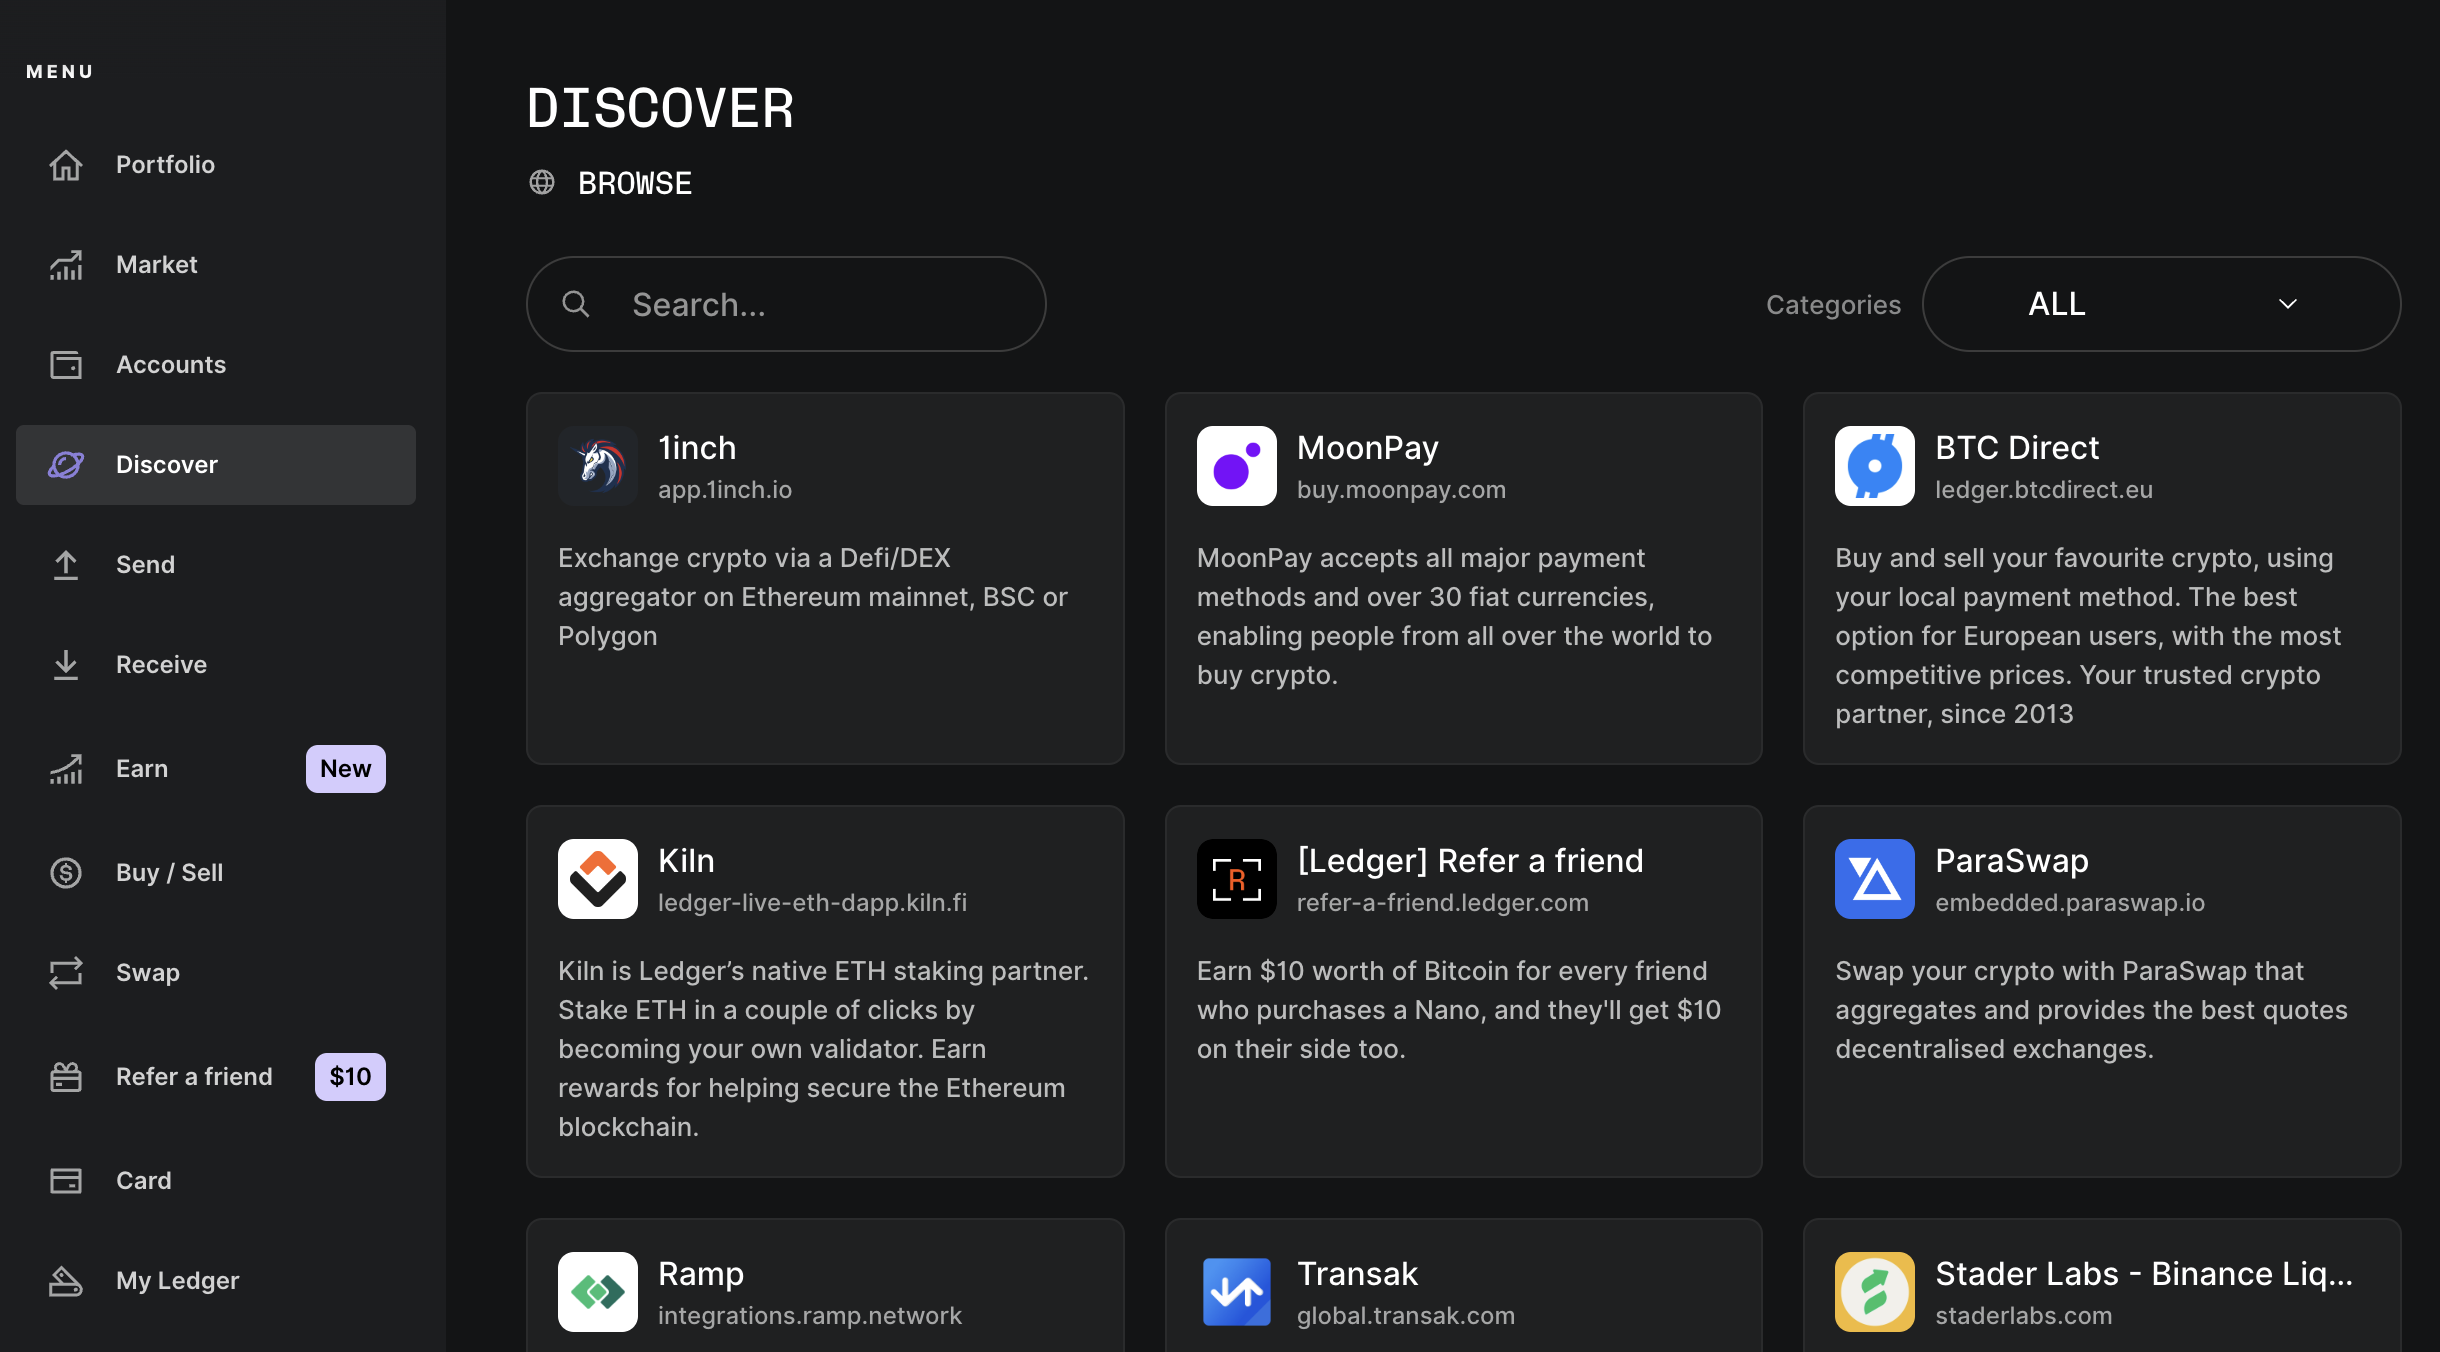 How to join a Discord server on any device - Android Authority